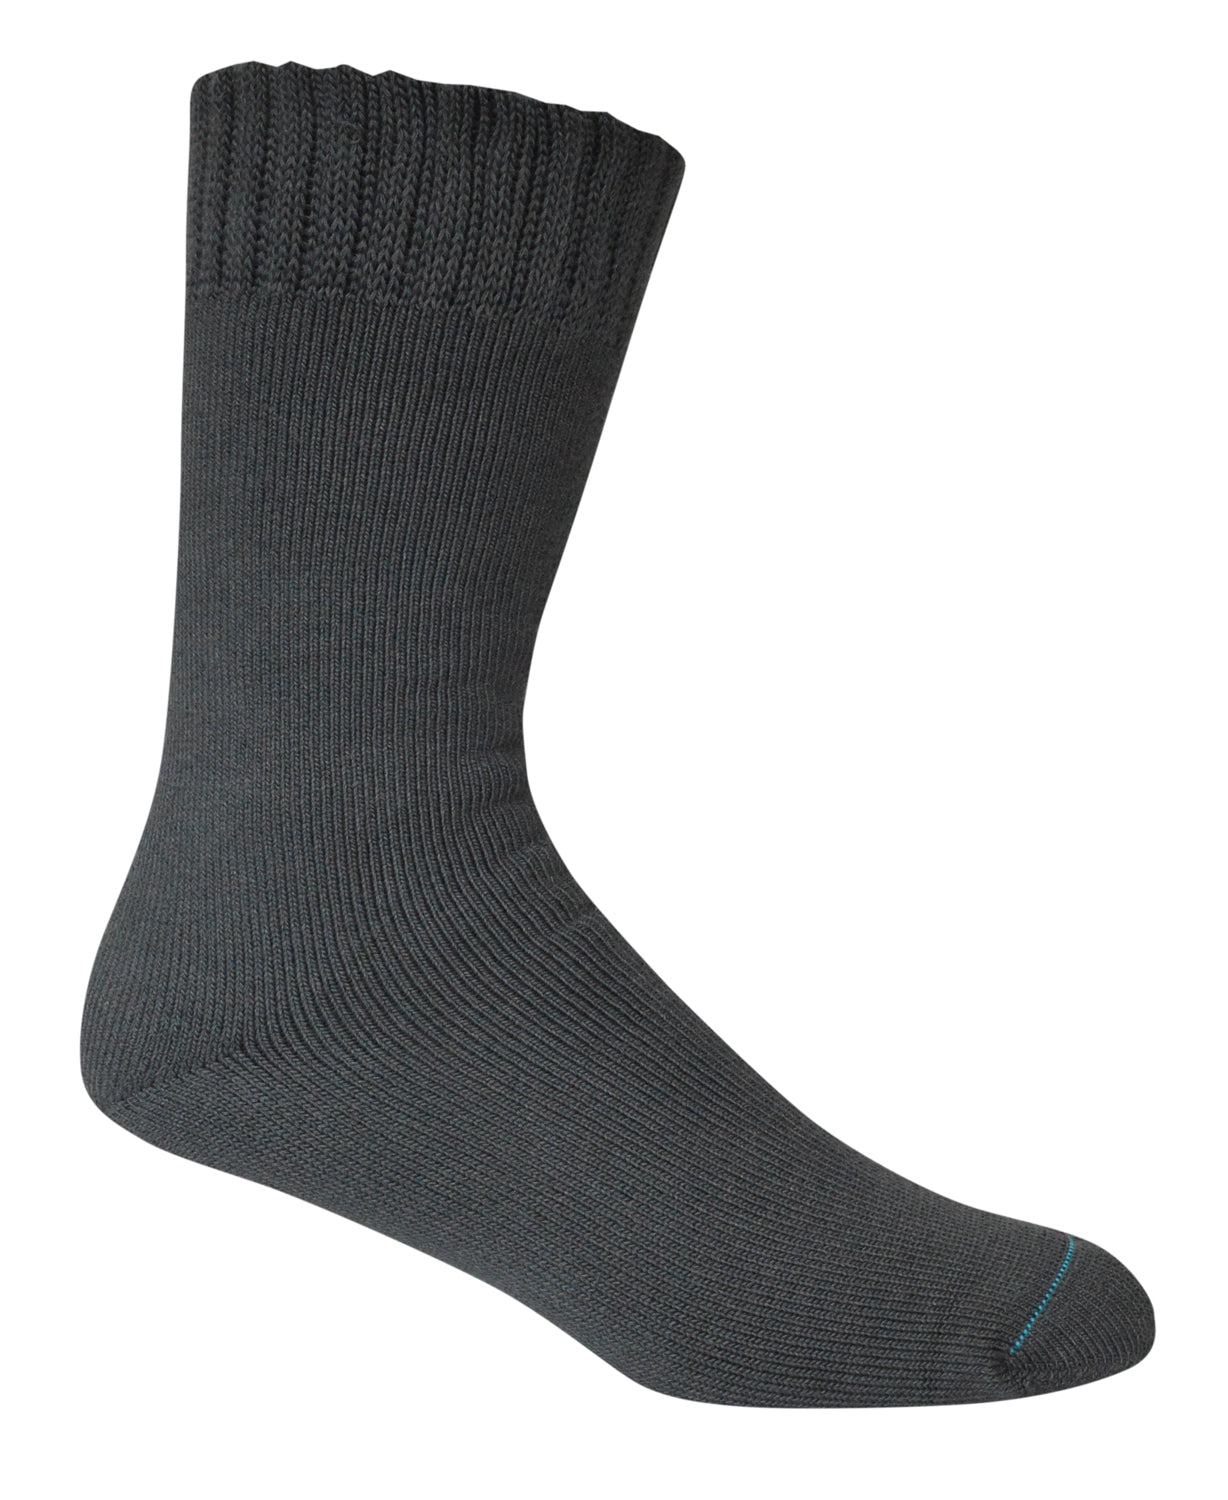 Extra Thick Bamboo Socks Miscellaneous by Bamboo Textiles | The Bloke Shop